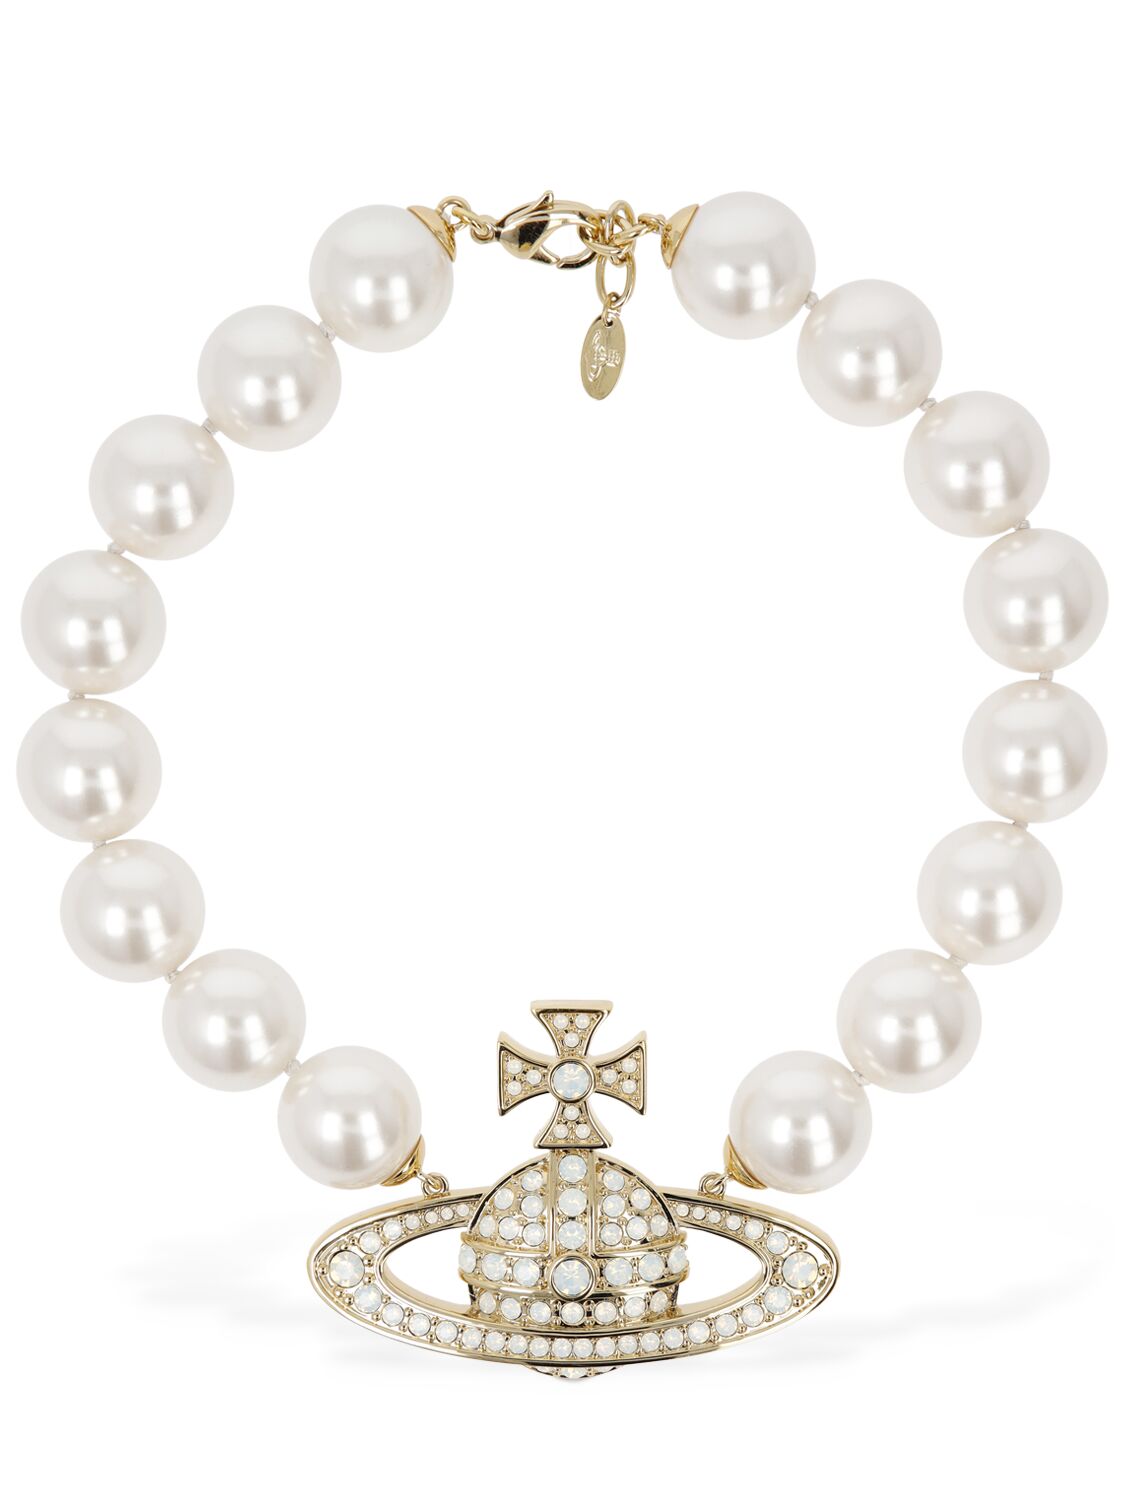 Vivienne Westwood Neysa Imitation Pearl Collar Necklace In Cream,gold